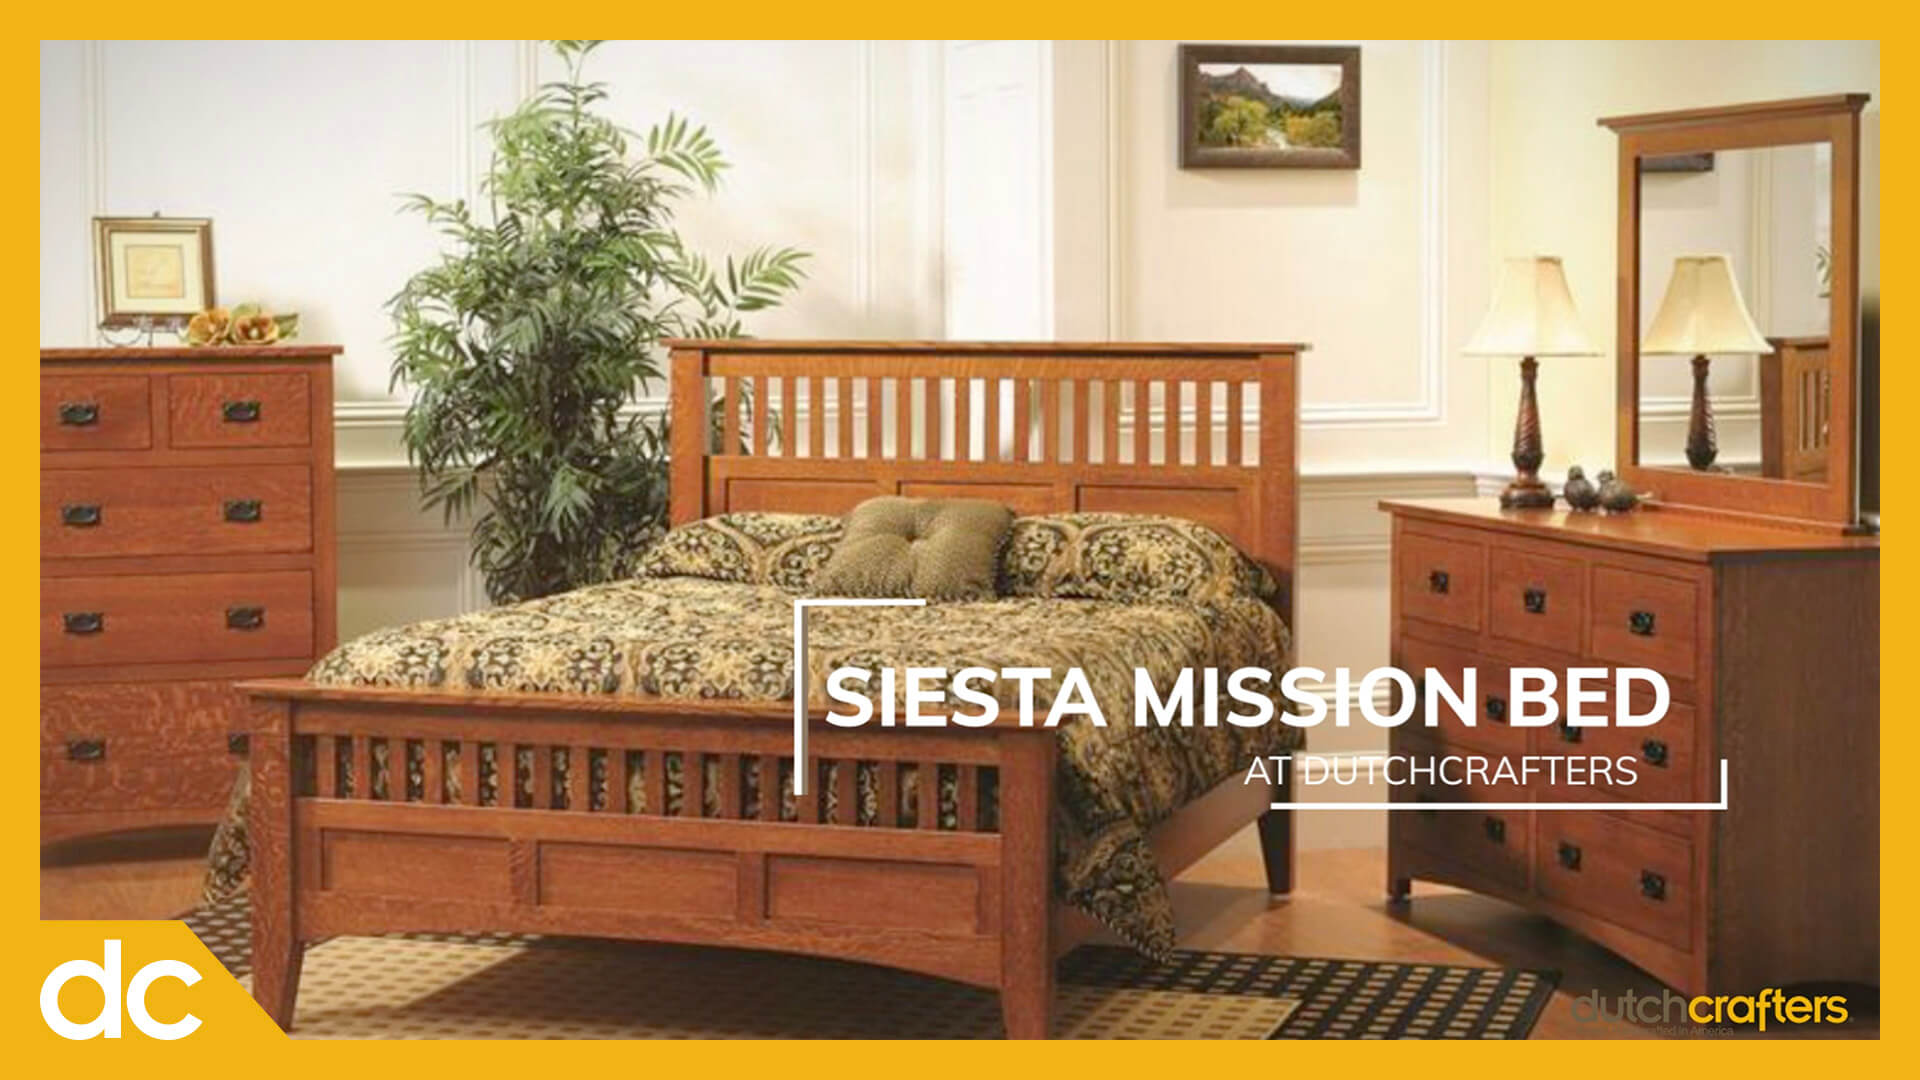 Siesta Mission Bed at DutchCrafters